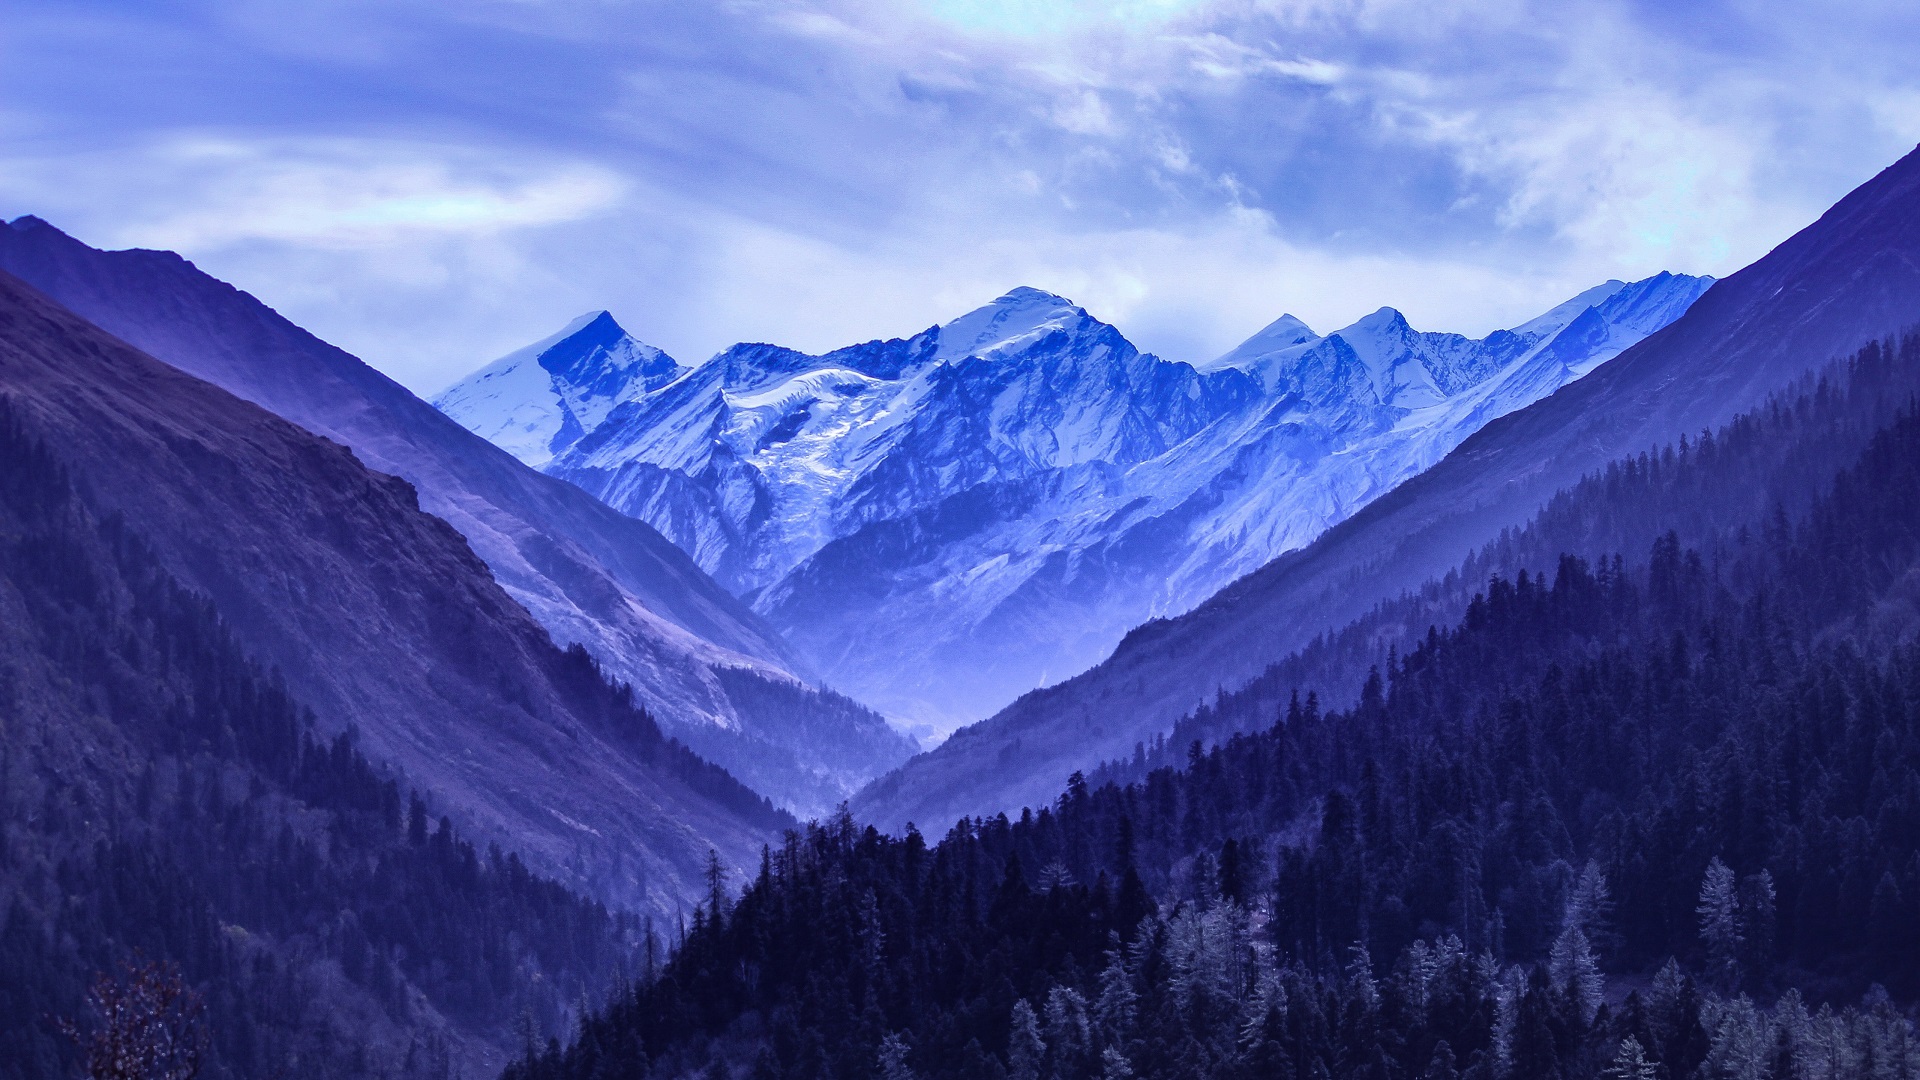 General 1920x1080 nature landscape mountains trees forest snow snowy mountain blue color correction snowy peak